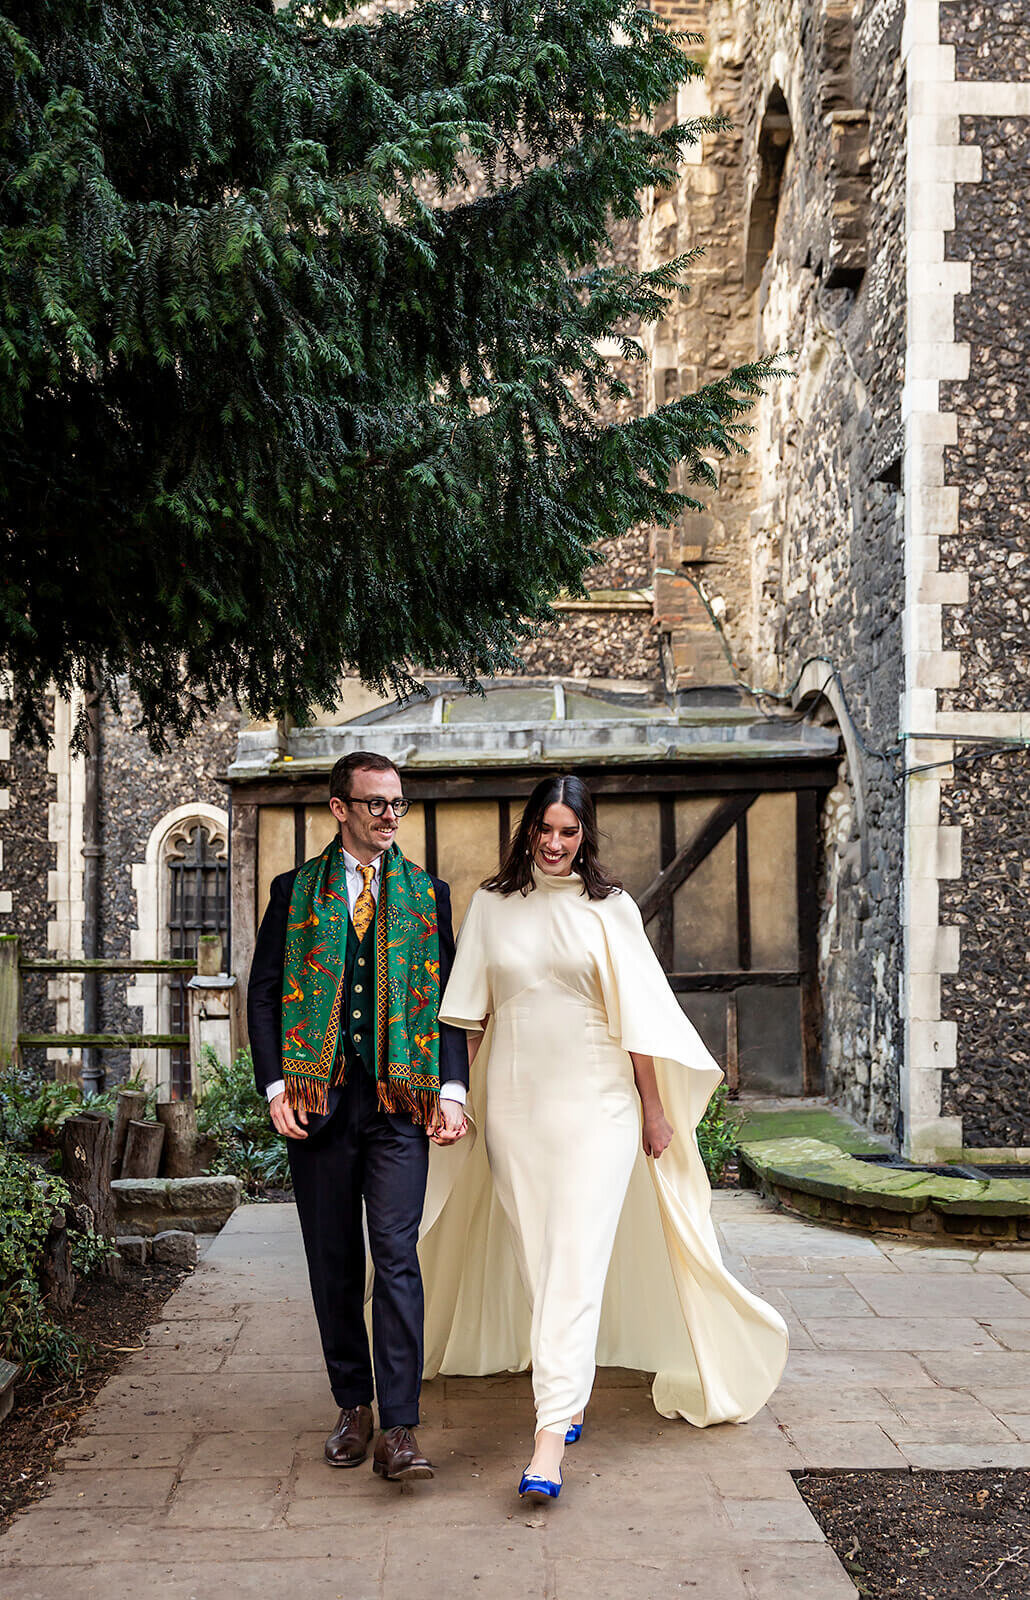 Bride and Groom walking hand in hand outside London church